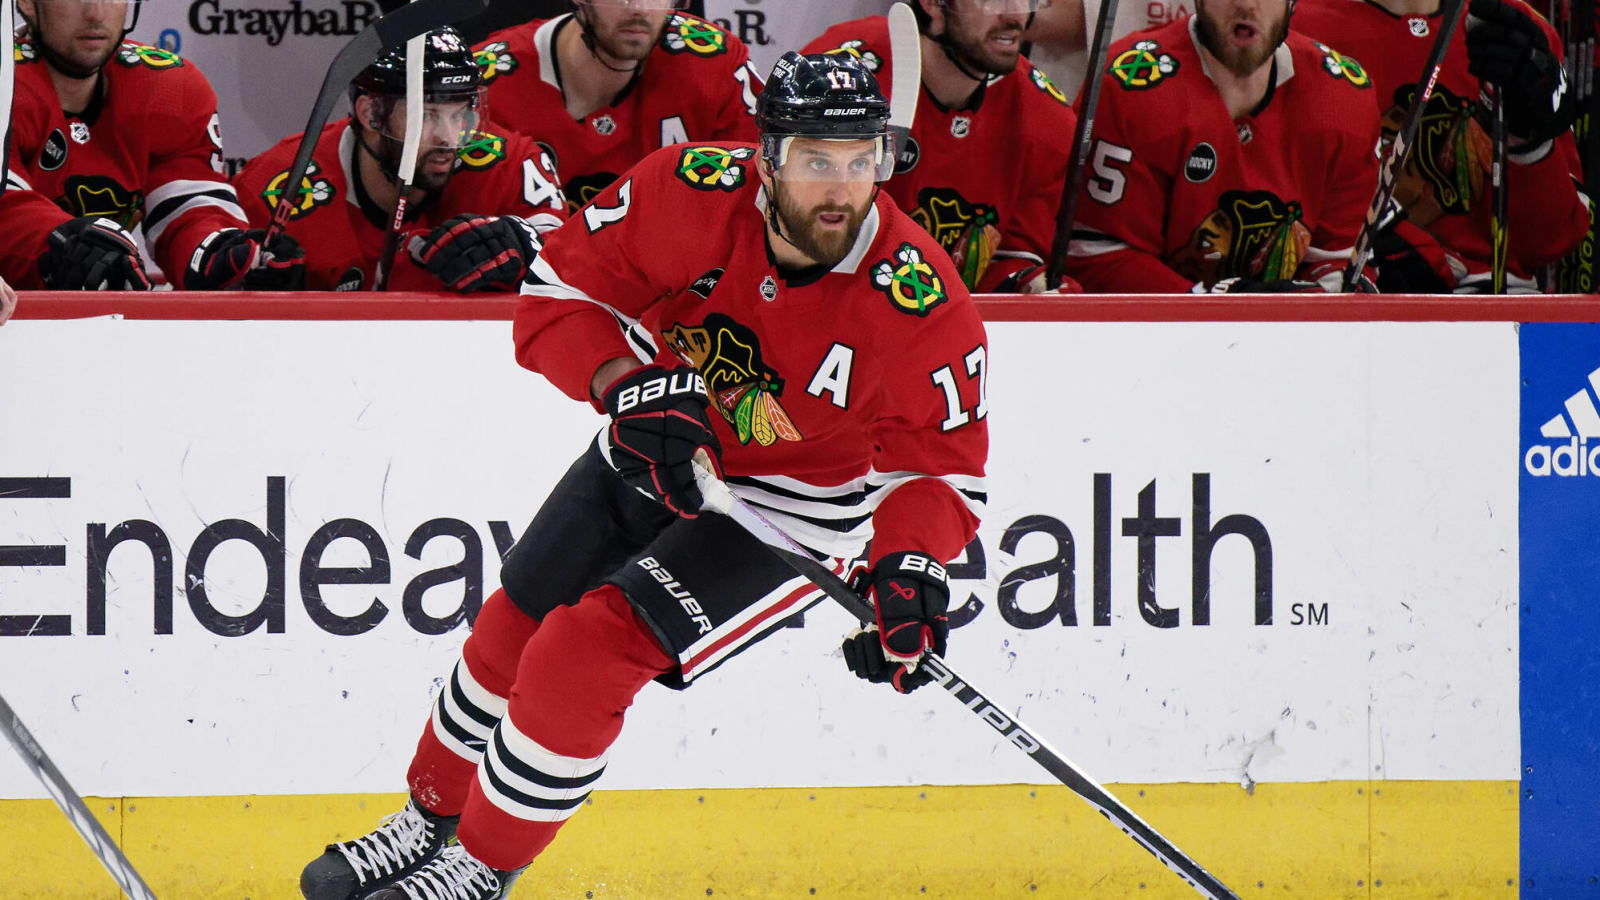 The Bruins Missing Nick Foligno Is Another Win for the Blackhawks